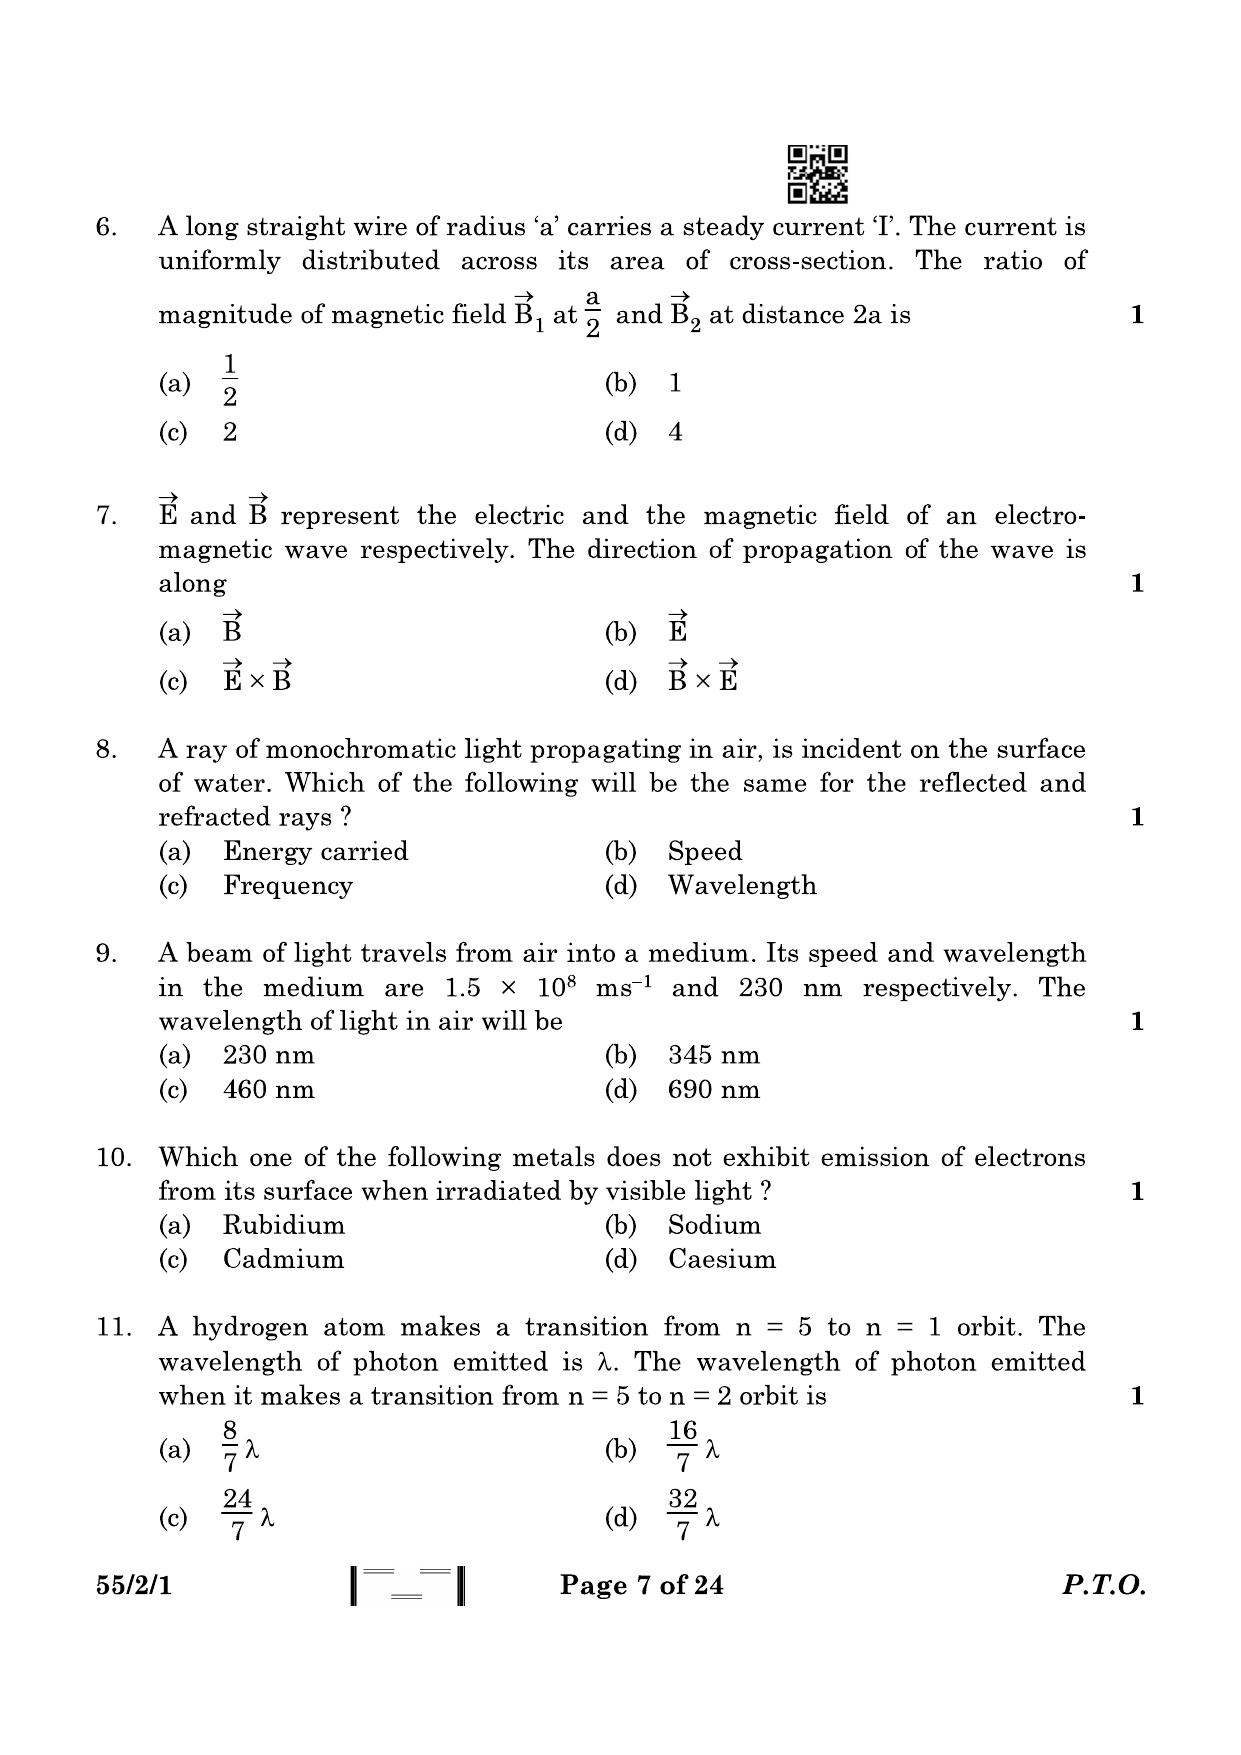 CBSE Class 12 55-2-1 Physics 2023 Question Paper - Page 7